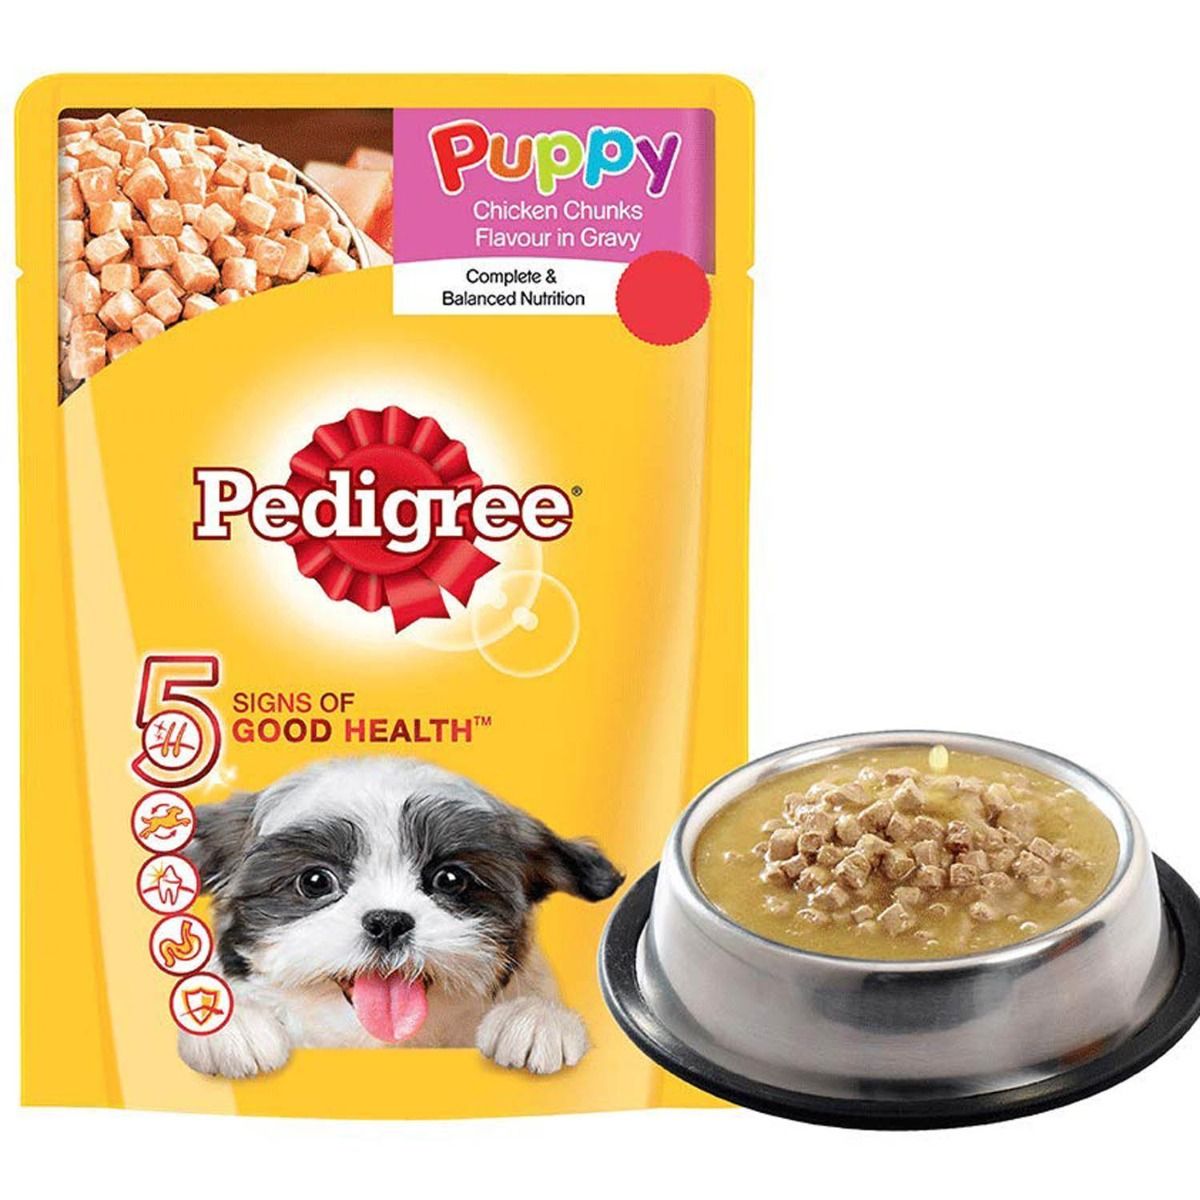 Pedigree Chicken Chunks Flavour Puppy Dog Food, 80 gm, Pack of 1 